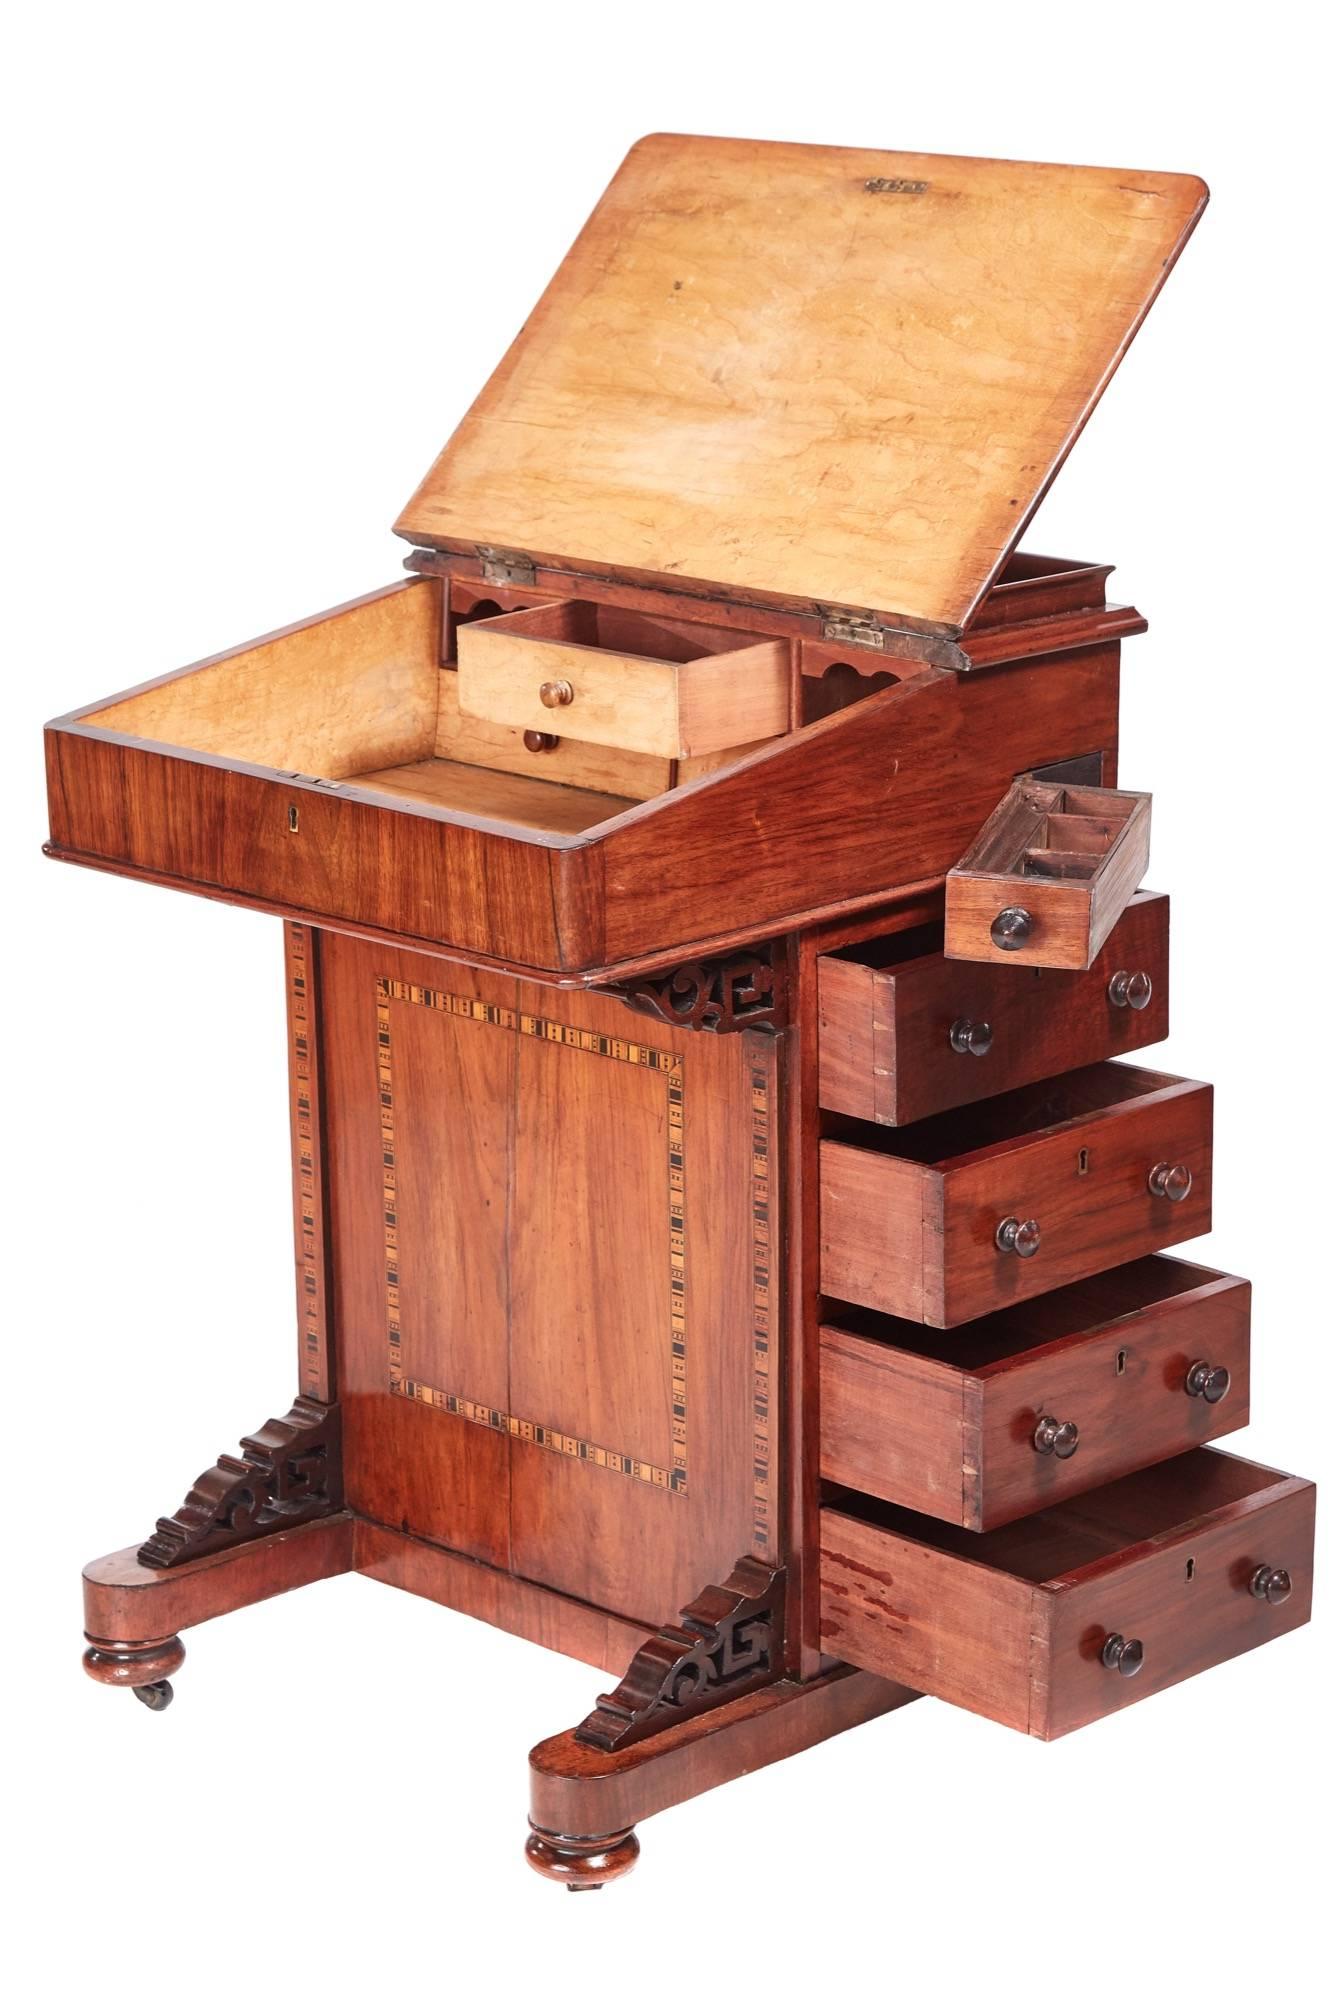 Victorian walnut freestanding inlaid davenport with unusual tumbridge ware inlay, shaped gallery, leather lined hinged writing slope opens to reveal a fitted interior, the right side having a slide out hinged pen drawer and four opening drawers with